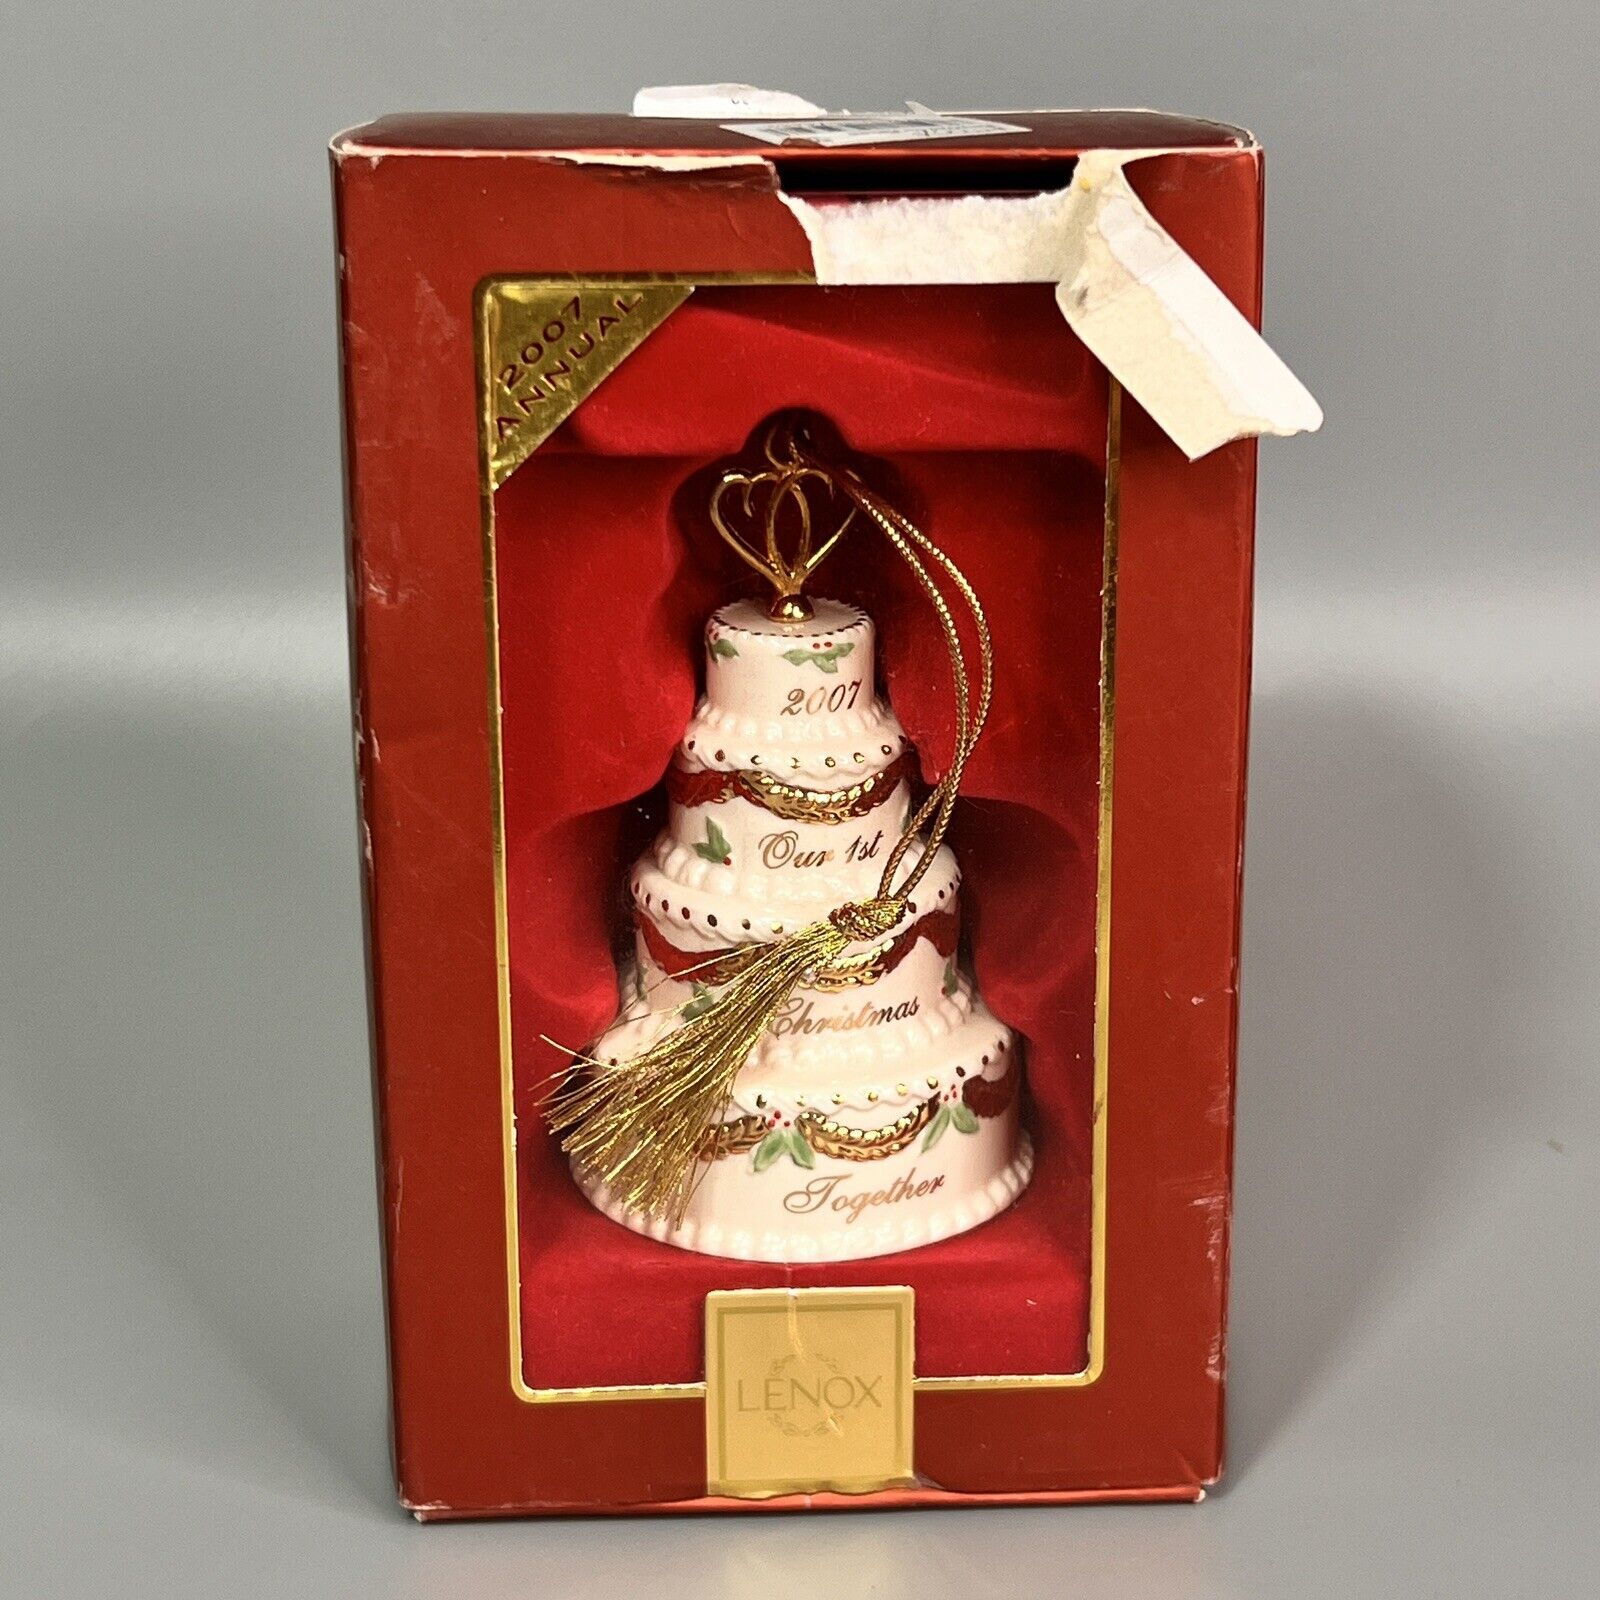 Lenox 2007 Annual Our First Christmas Together Ornament Wedding Cake Box